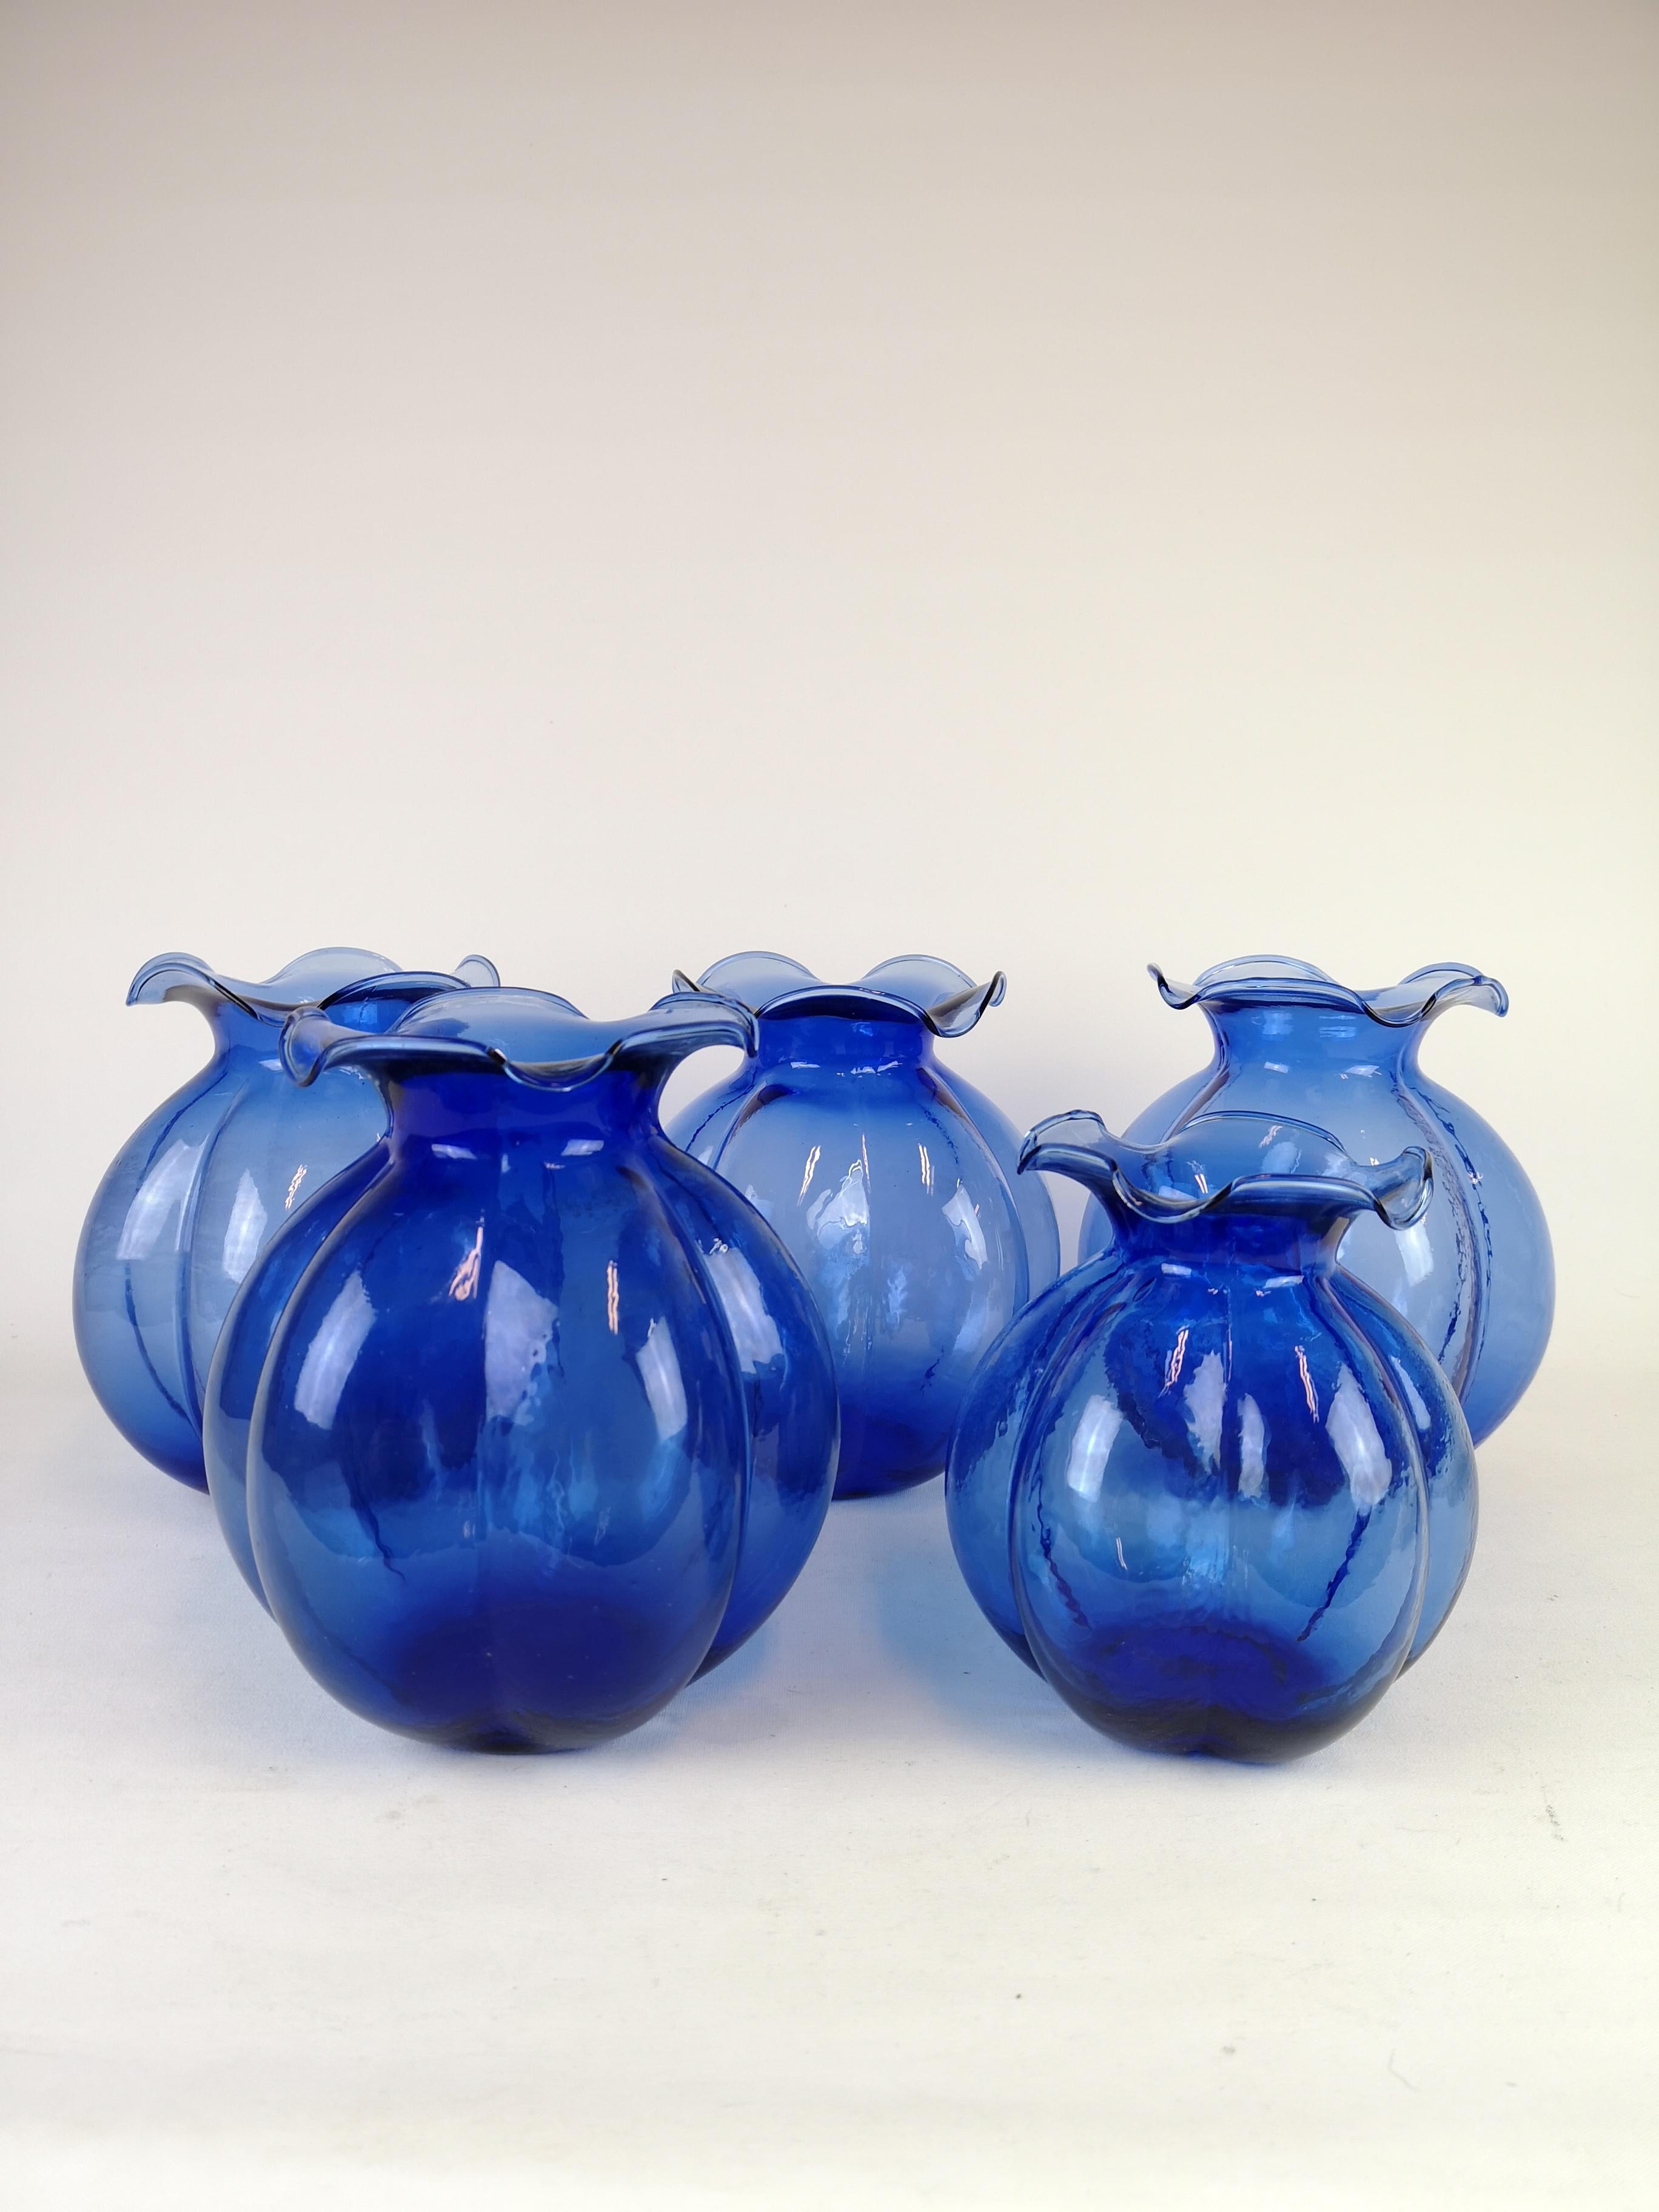 Wonderful shaped vases with a nice blue color are these 5 vases. They are made in Johansfors glass factory Sweden in the 1950s. 

Good condition.

Measures: 4 big one’s H 20 cm D 15 cm 1 Smaller H 16 D 14.
 